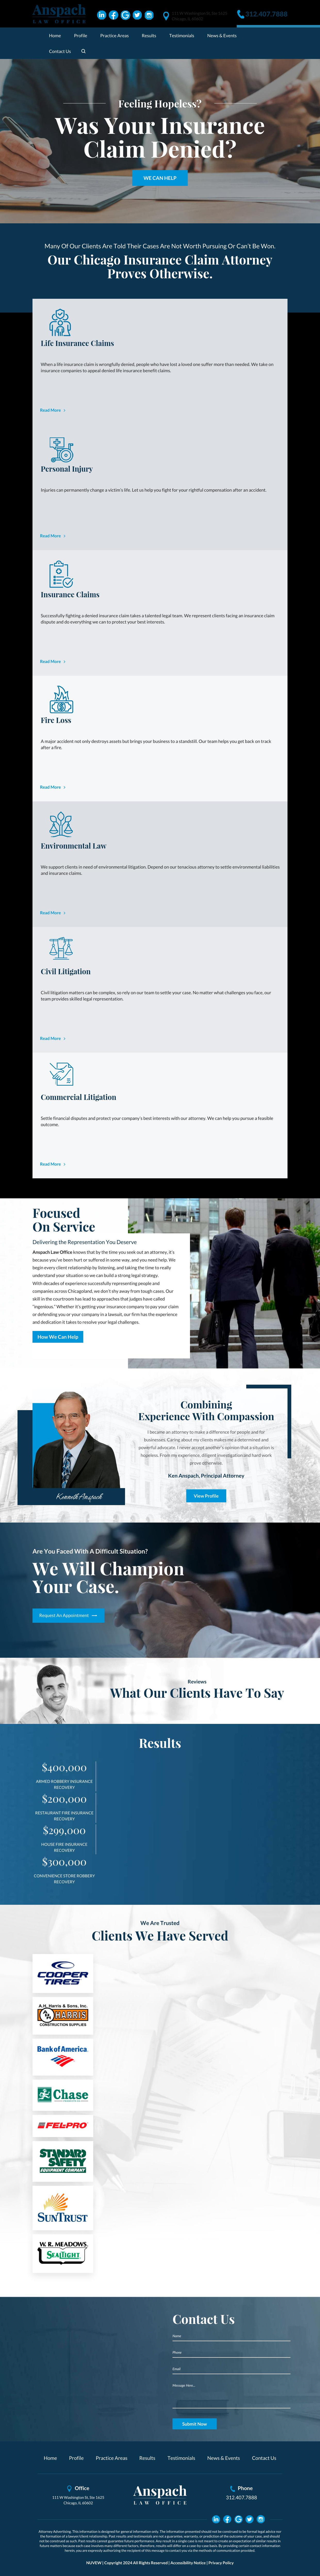 Anspach Law Office - Chicago IL Lawyers